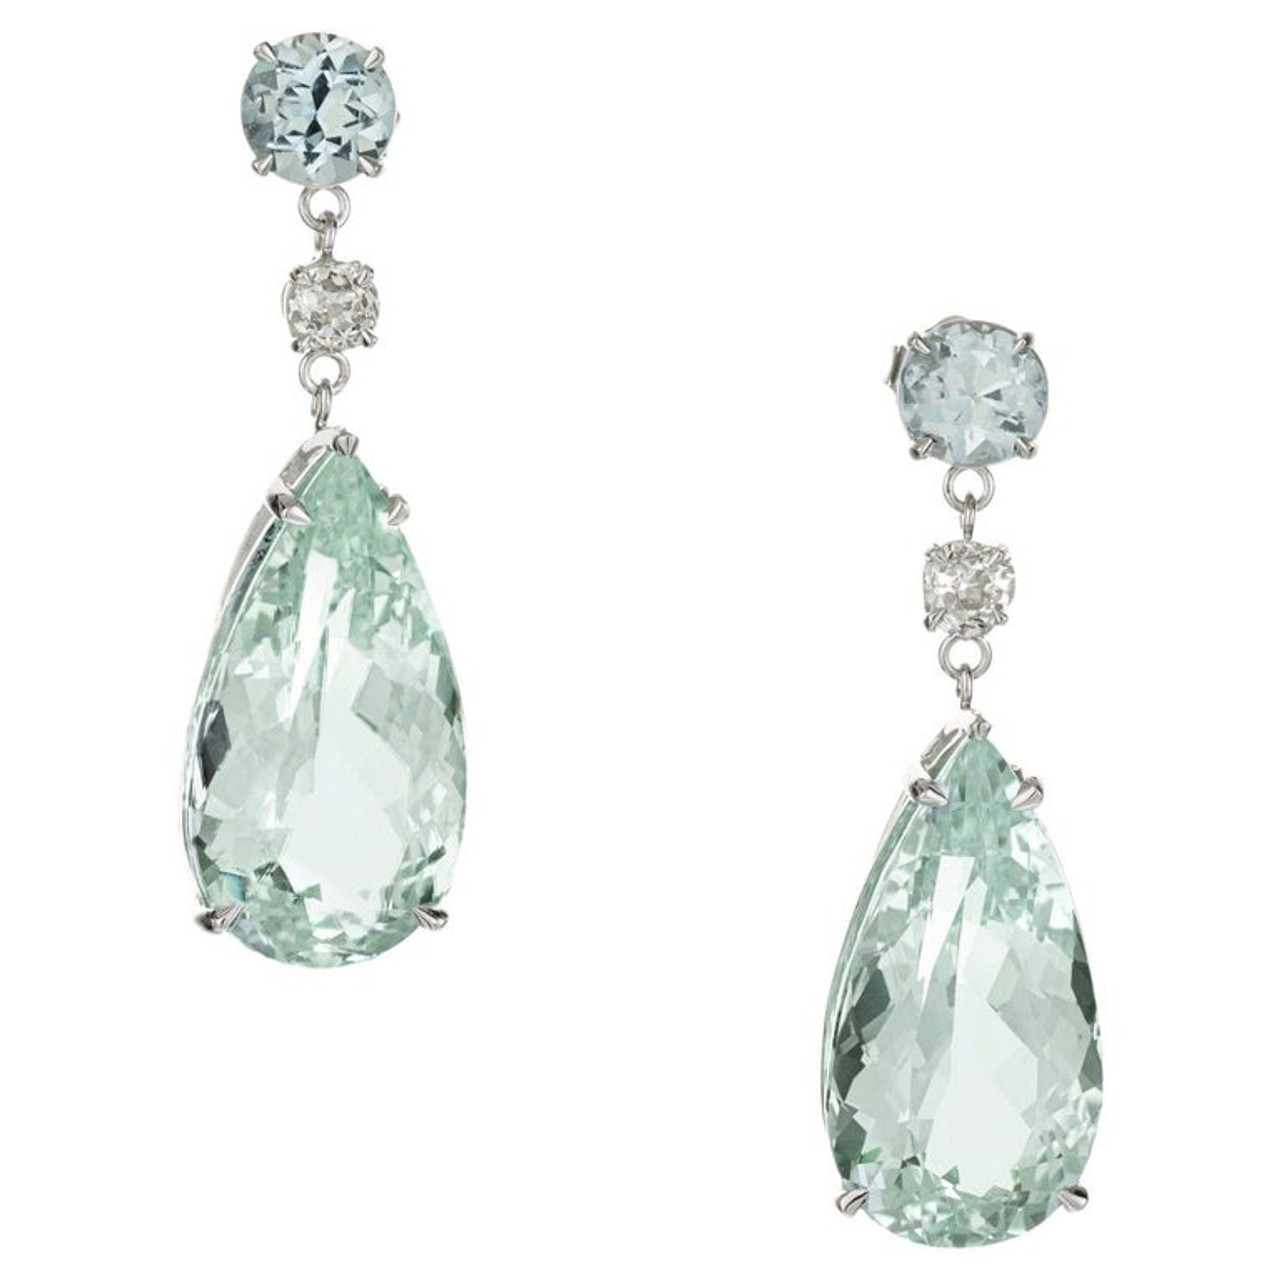 Elegance Oval-Shaped Sterling Silver Earrings Adorned With 2 Aquamarine  Center Stones And 12 Diamonds